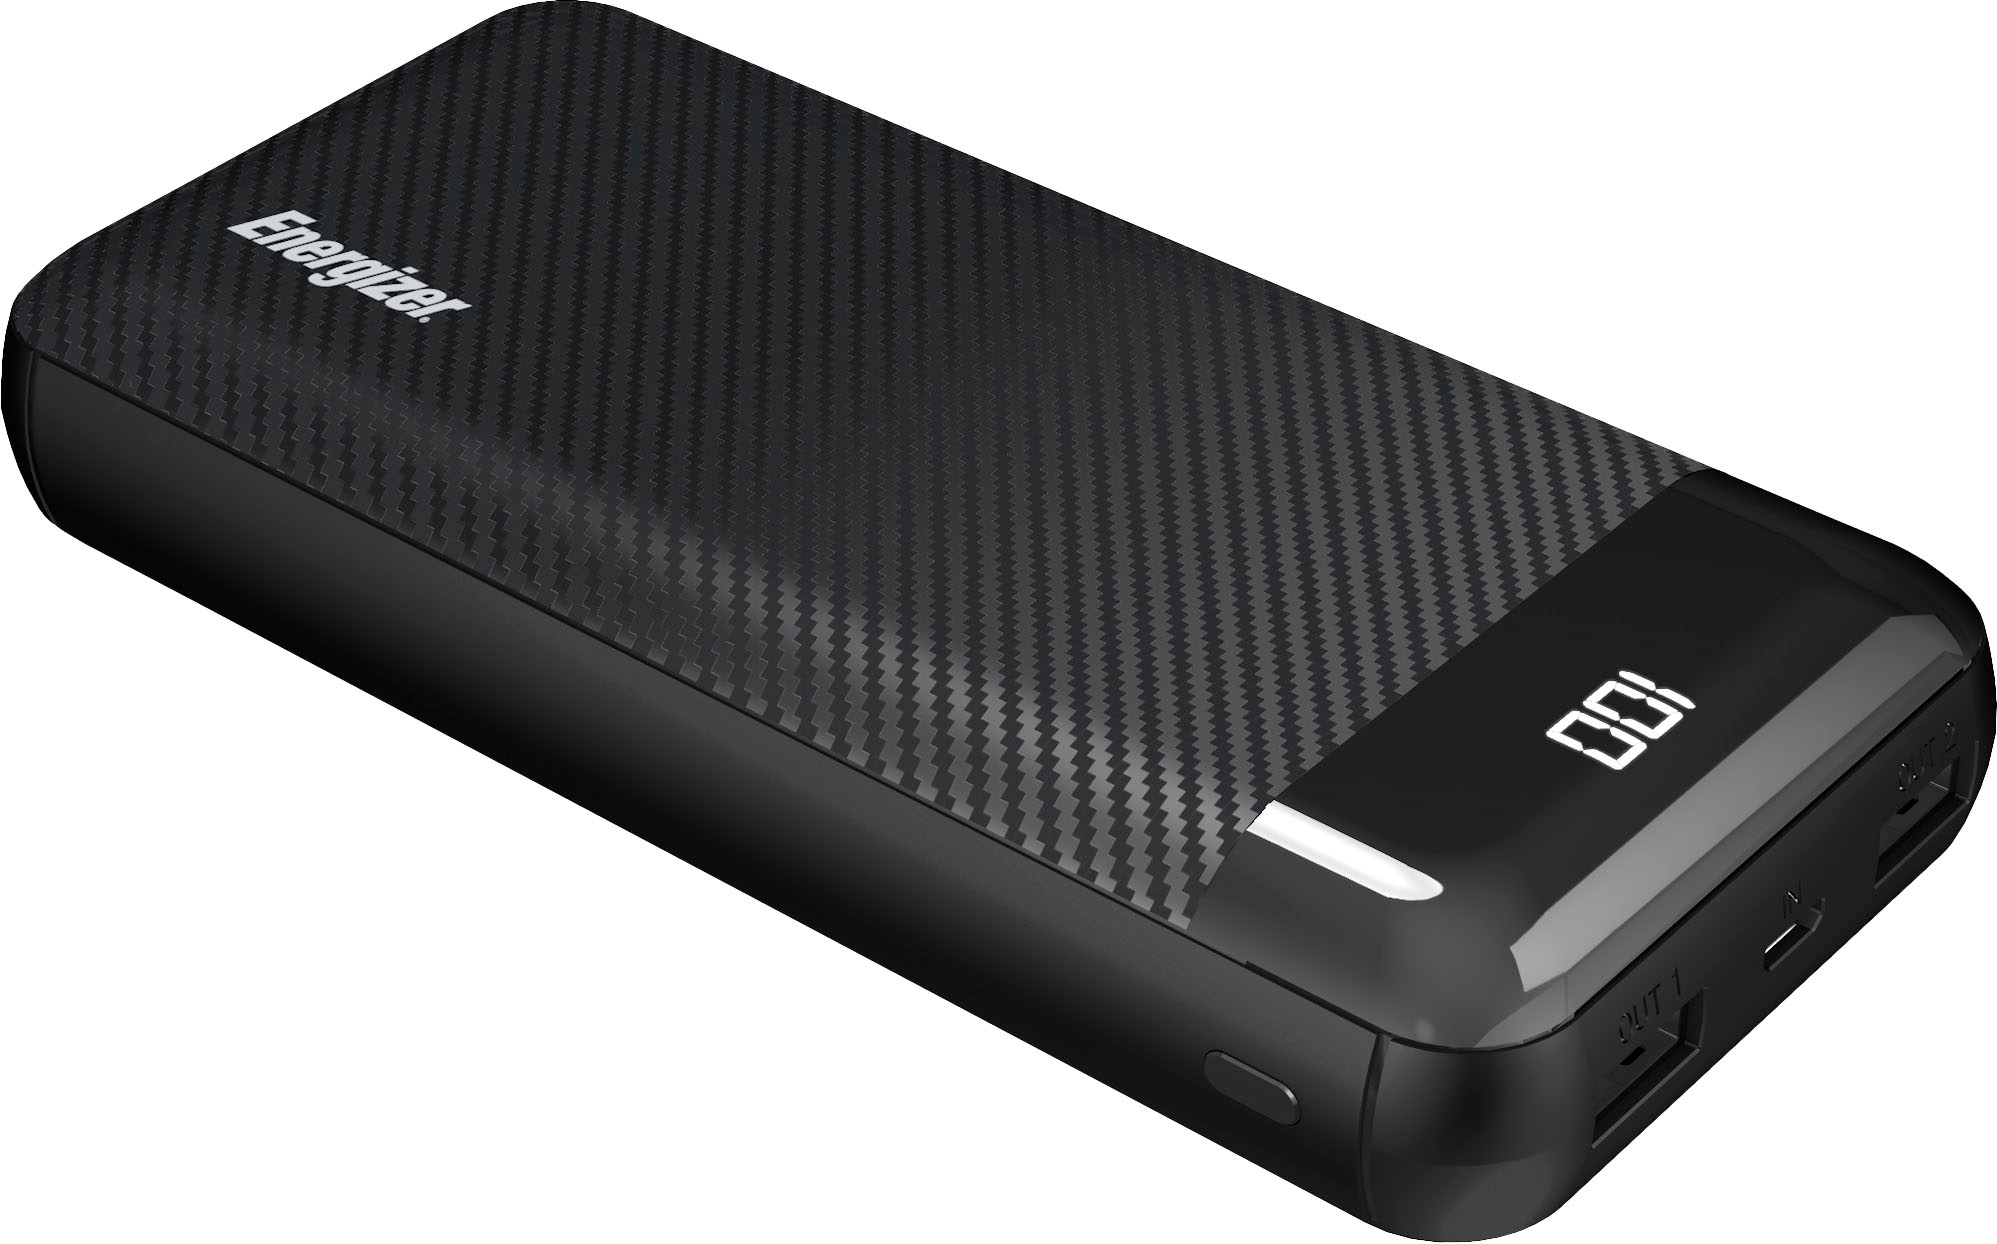 Energizer MAX 20,000mAh High Speed Universal Portable Charger/Power Bank with Display for Apple, Google & USB Devices Black UE20068 - Best Buy